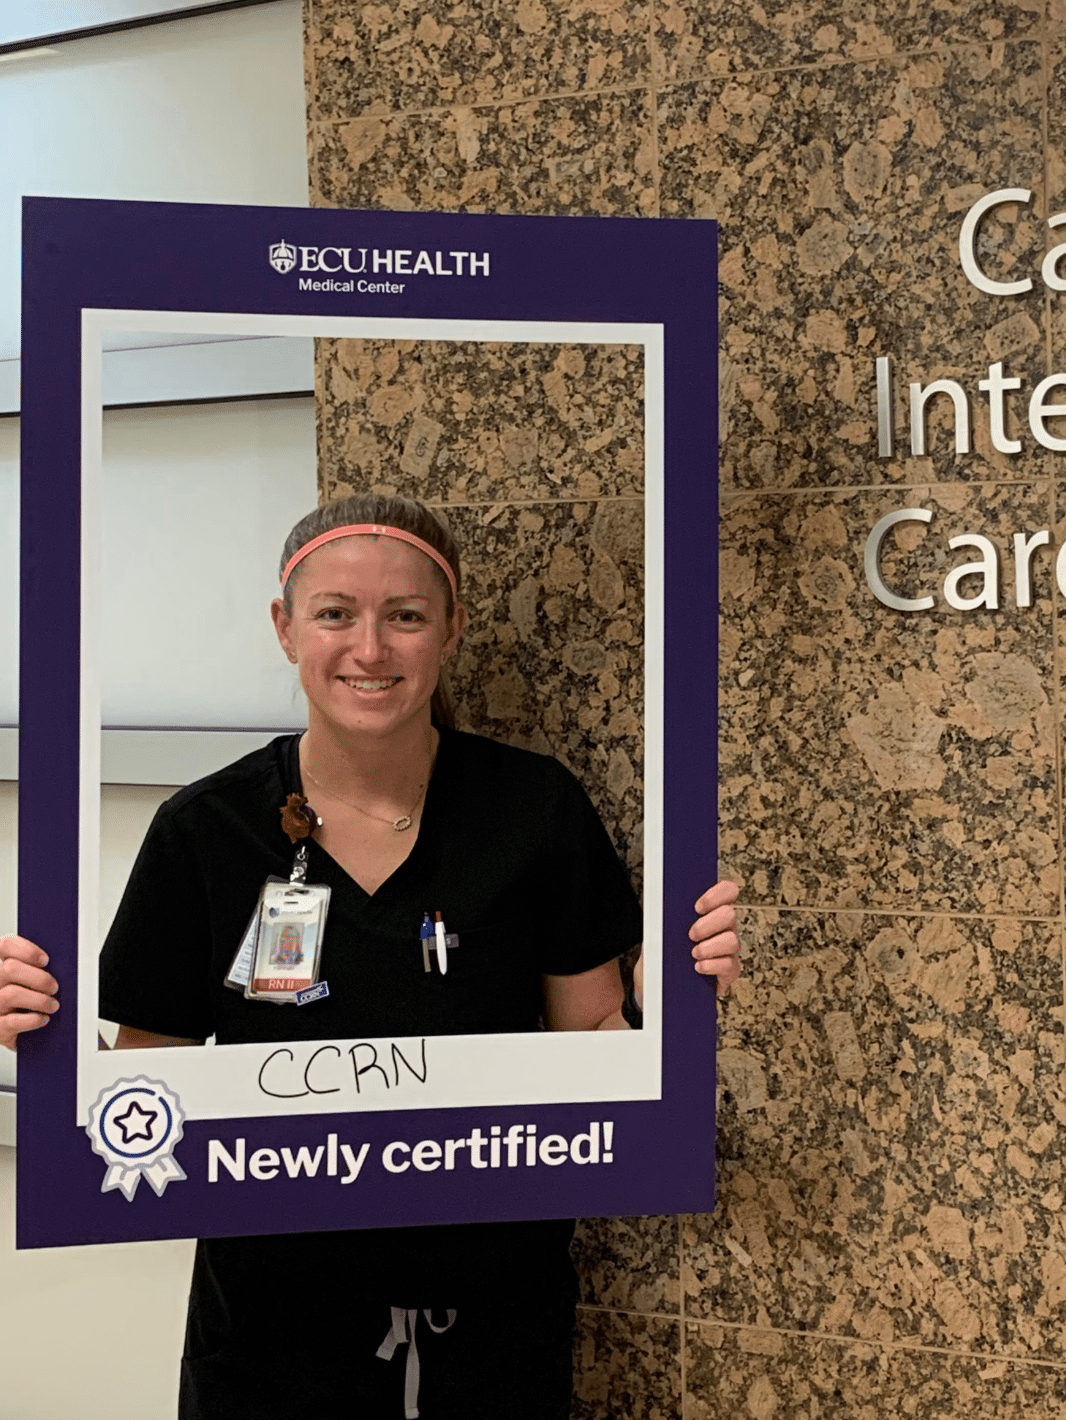 Mary Brannon, BSN, RN, CCRN, works on CICU and she received her Critical Care Registered Nurse (CCRN)